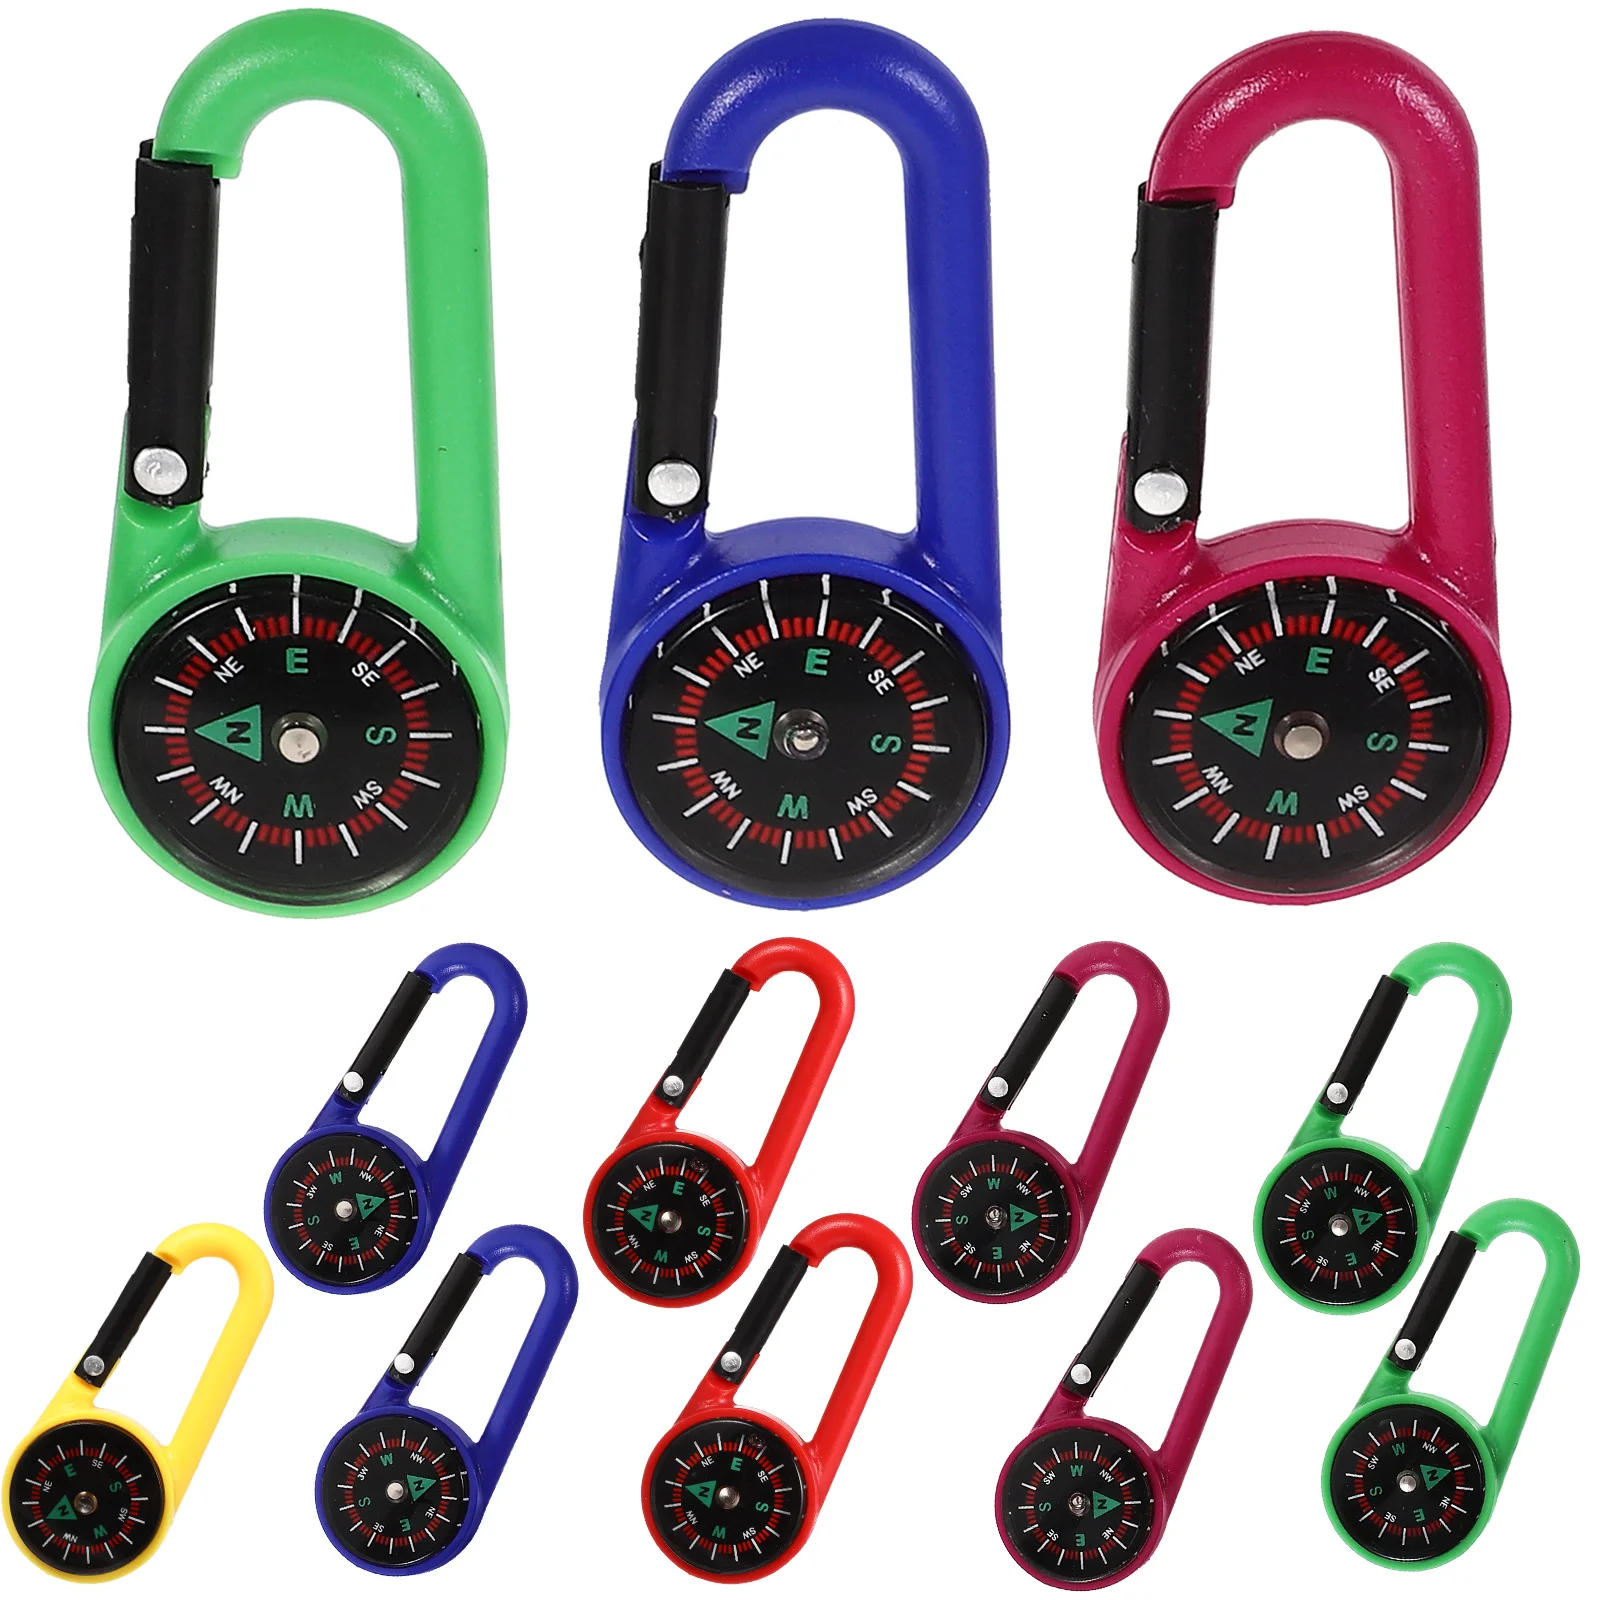 

TOYMYTOY 12pcs Plastic Compass Climbing Carabiner Outdoor Self Locking Carabiner Clip Hook Keychain for Travelling Hiking